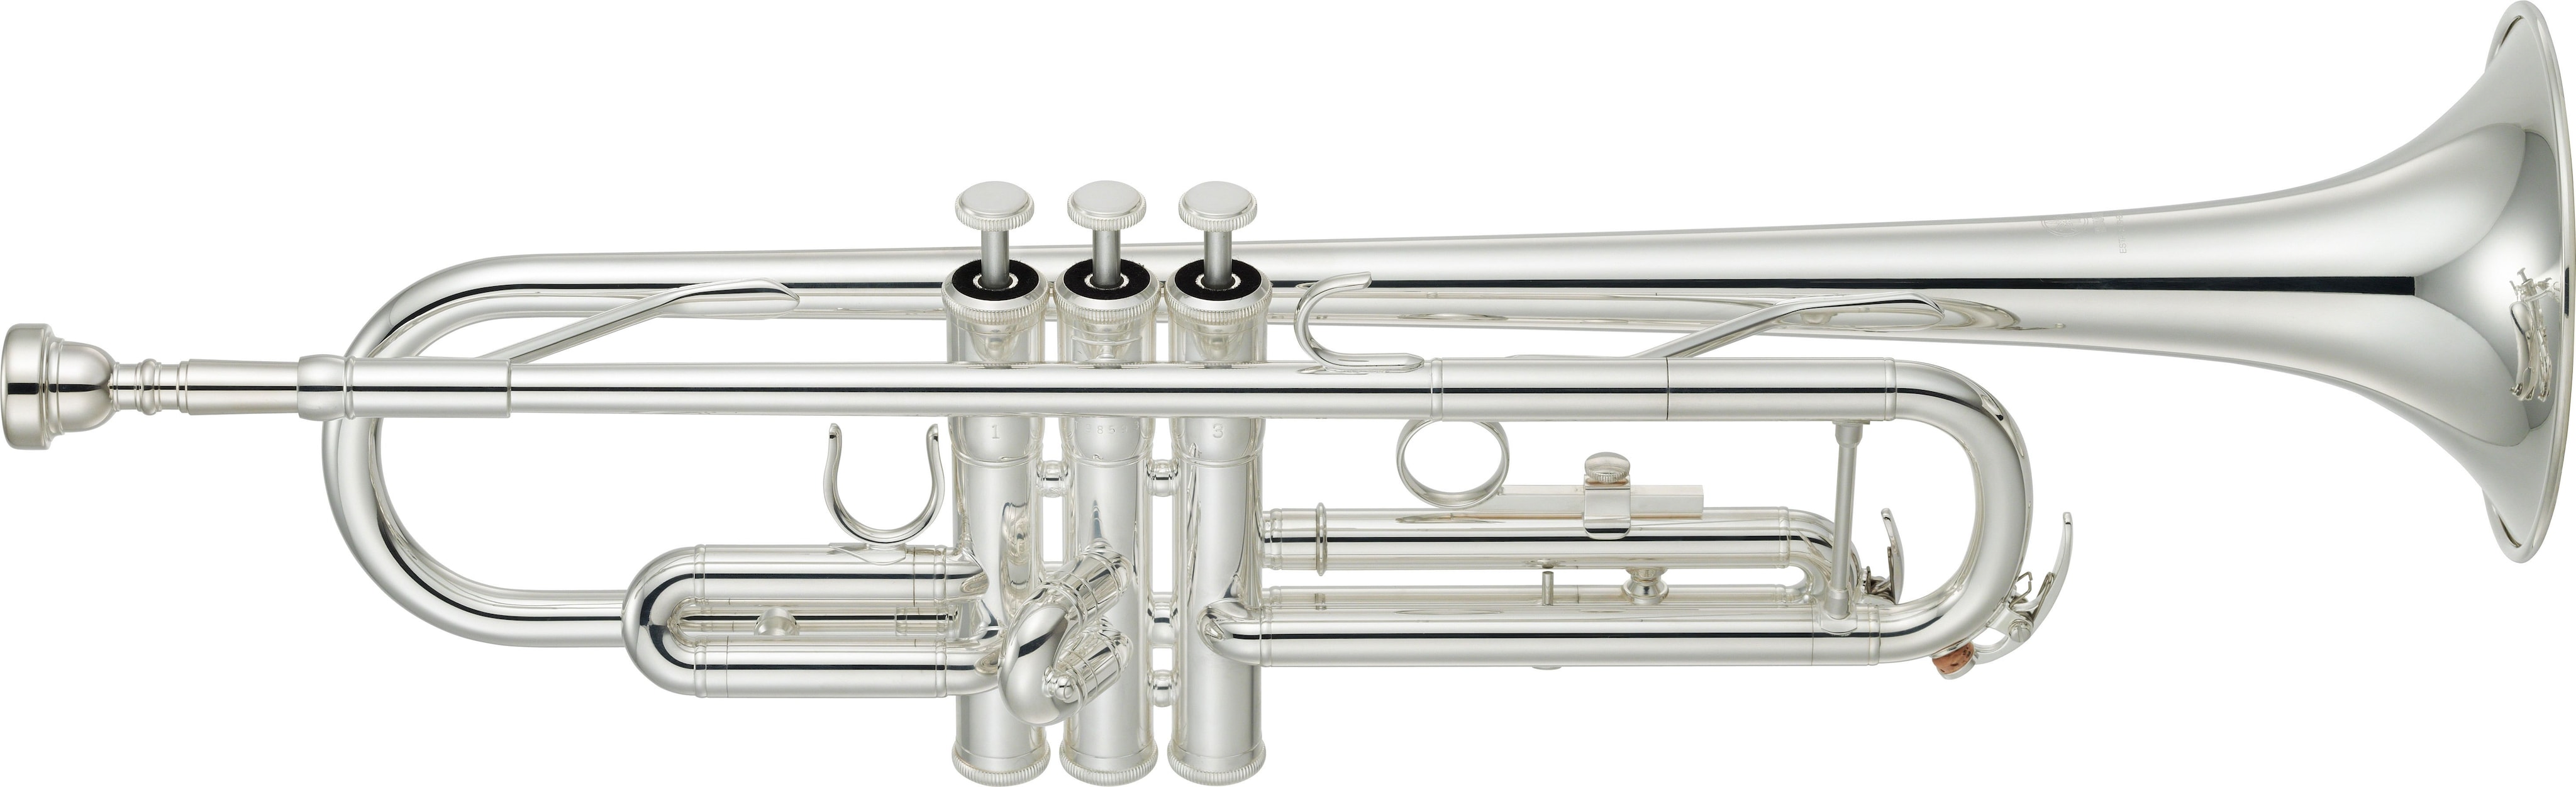 YTR-3335 - Overview - Bb Trumpets - Trumpets - Brass & Woodwinds 